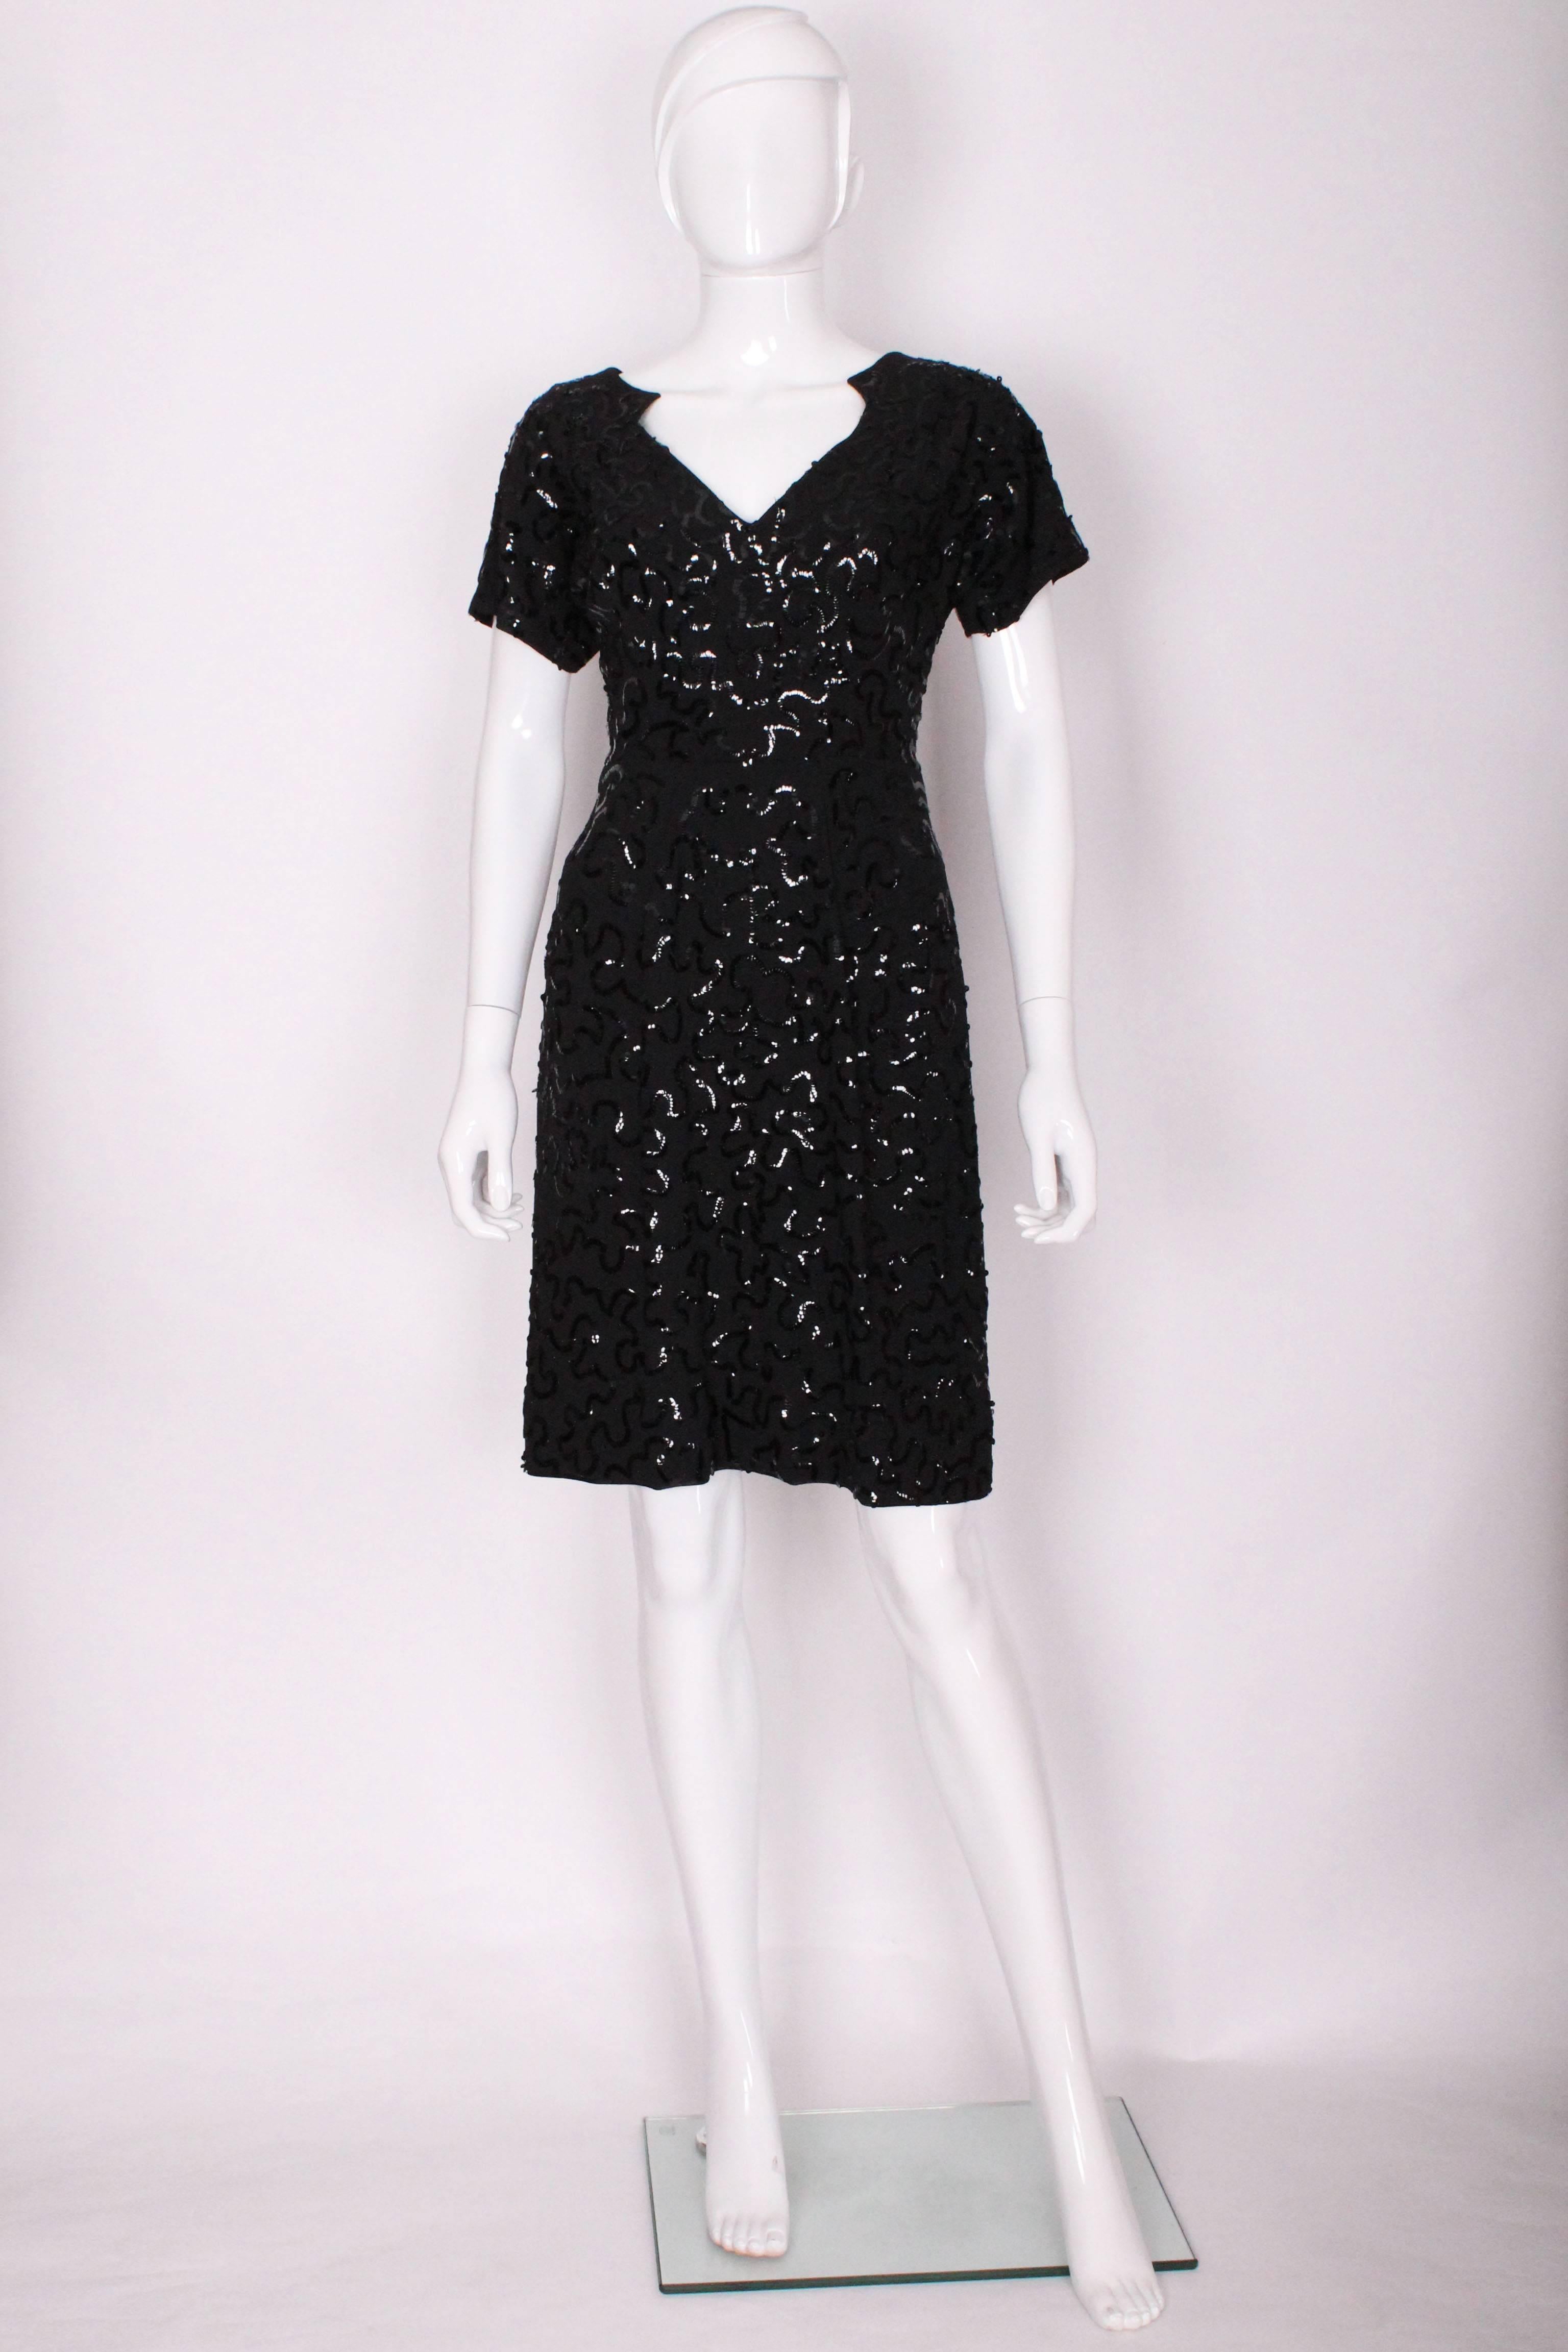 A chic cocktail dress by French designer Jeanne Paquin.
The dress is made of a wool crepe with black sequins sewn on in a squiggle pattern . It has a v neckline with shape at the shoulder and 'backline', with a central back zip.It has short sleaves,